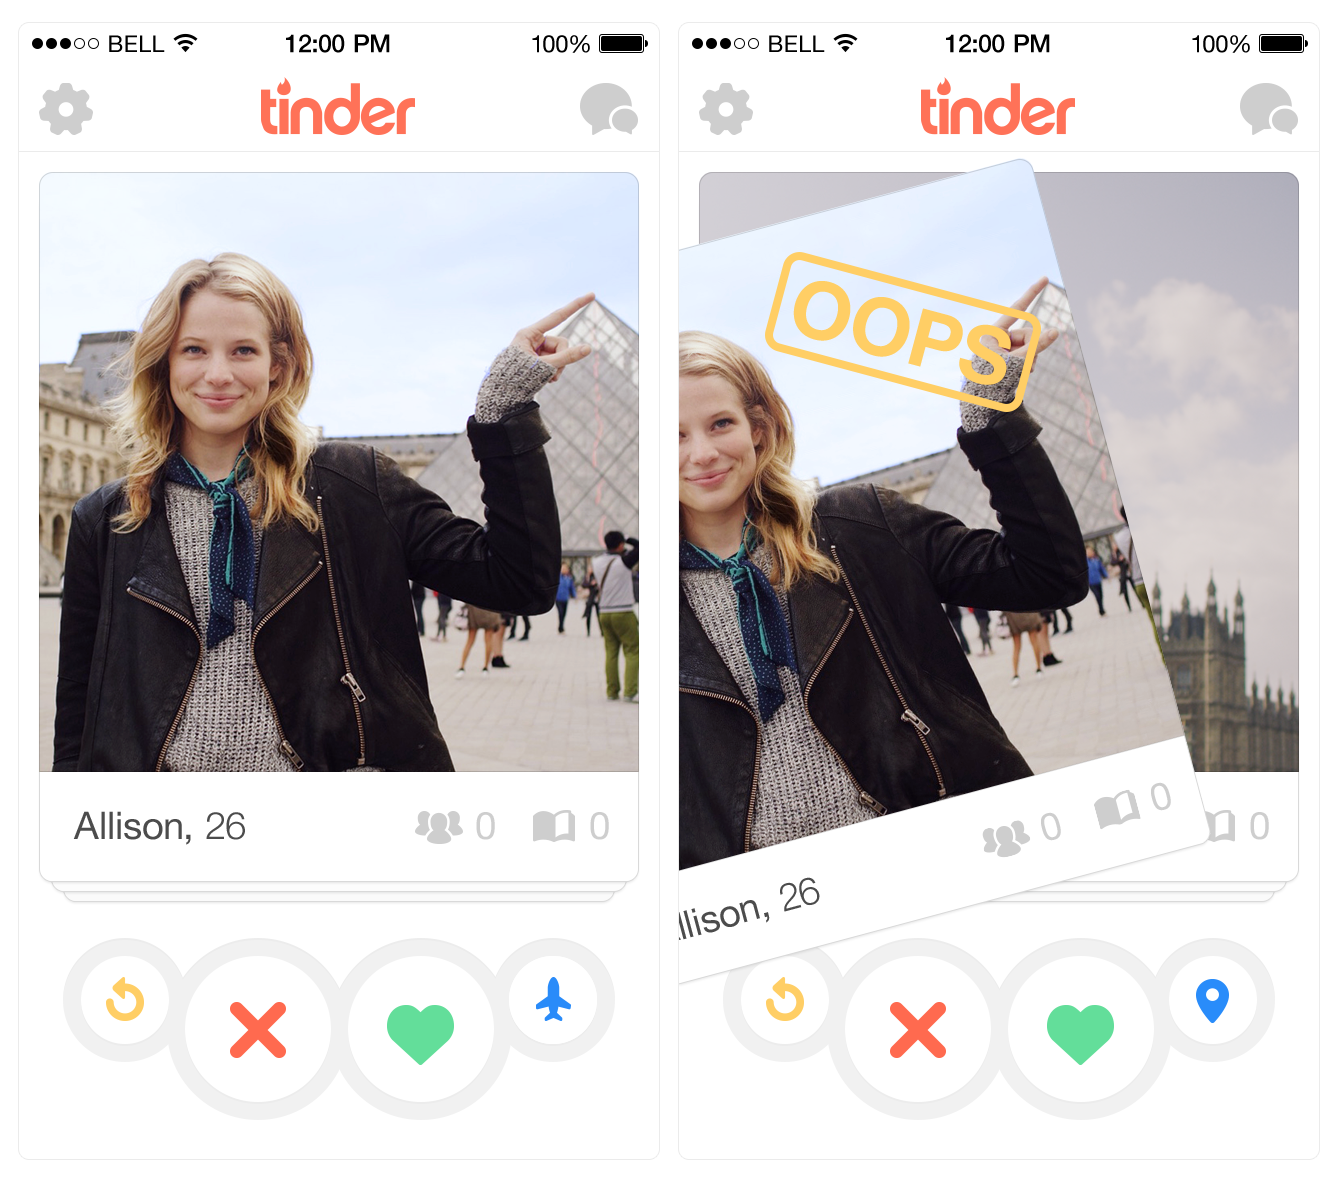 How do I unsubscribe from tinder plus?